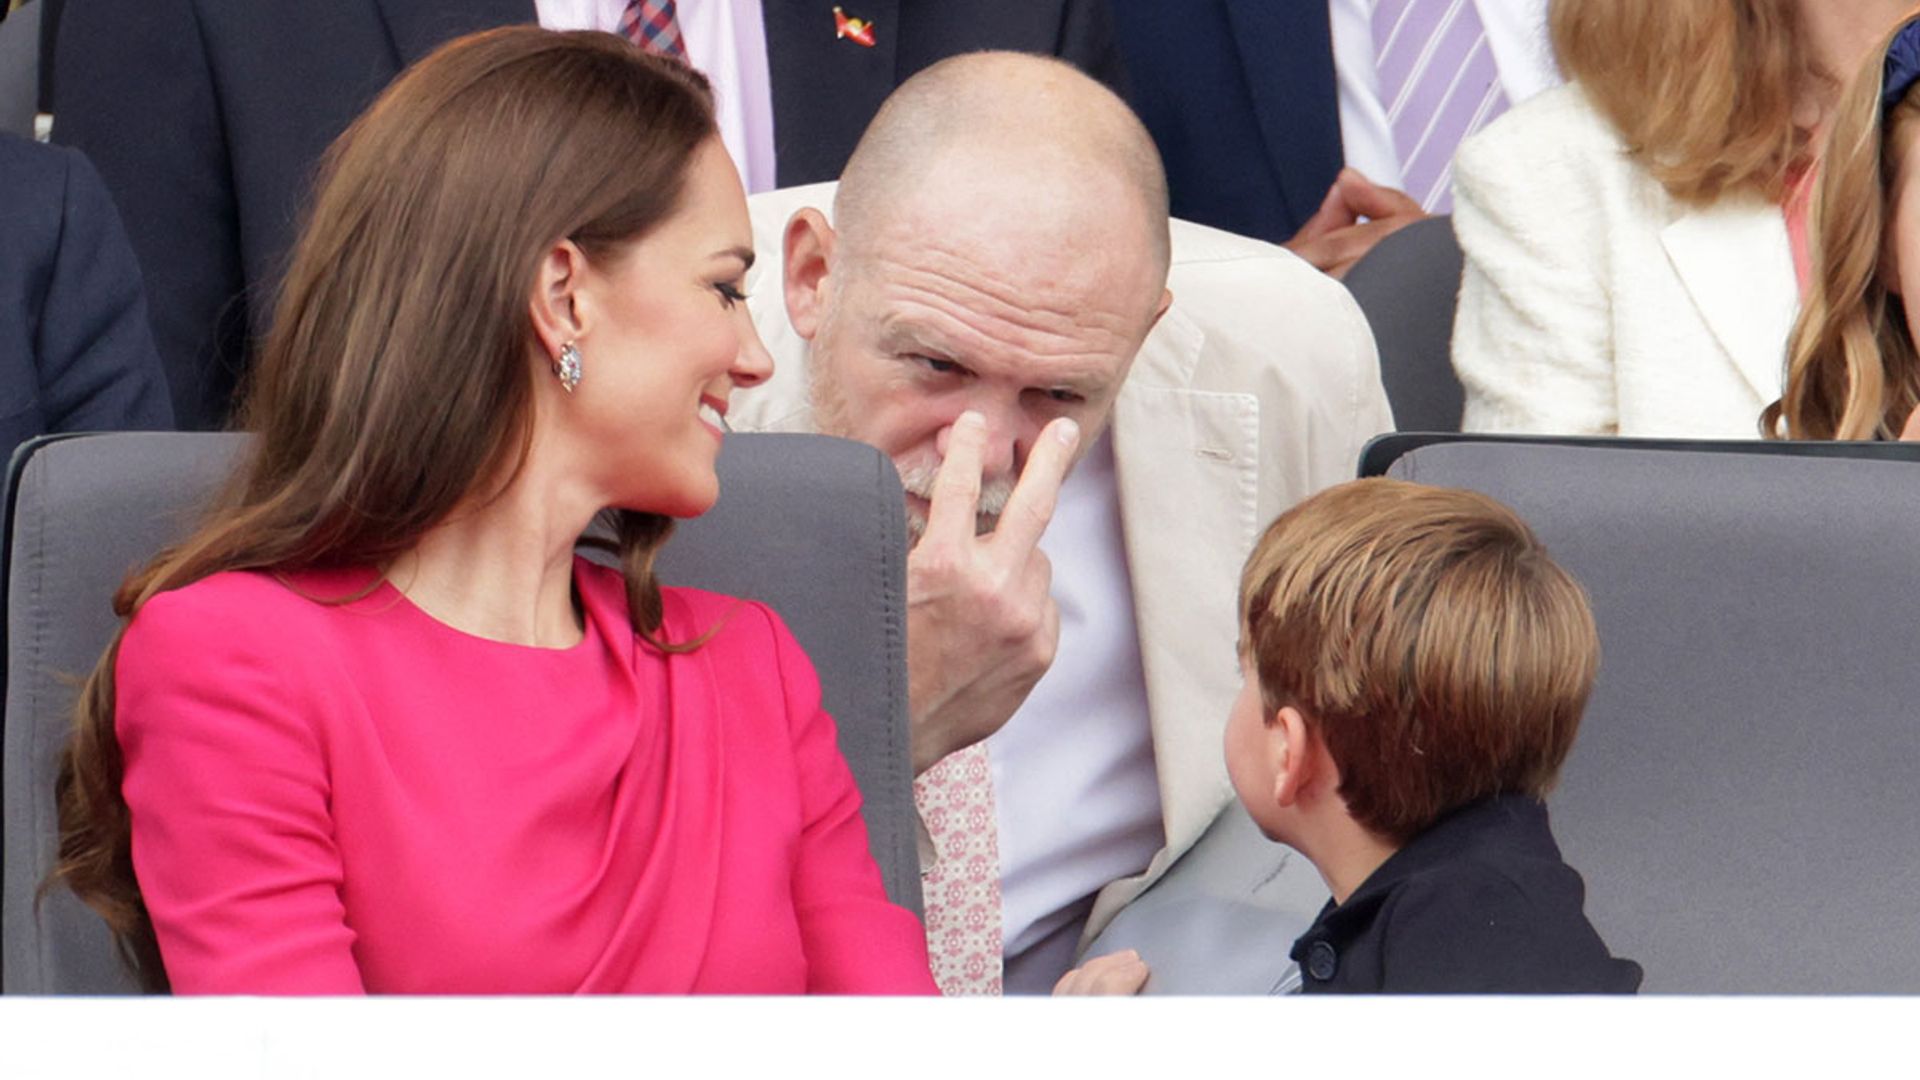 Mike Tindall shares candid behind-the-scenes details on Prince Louis at the Jubilee